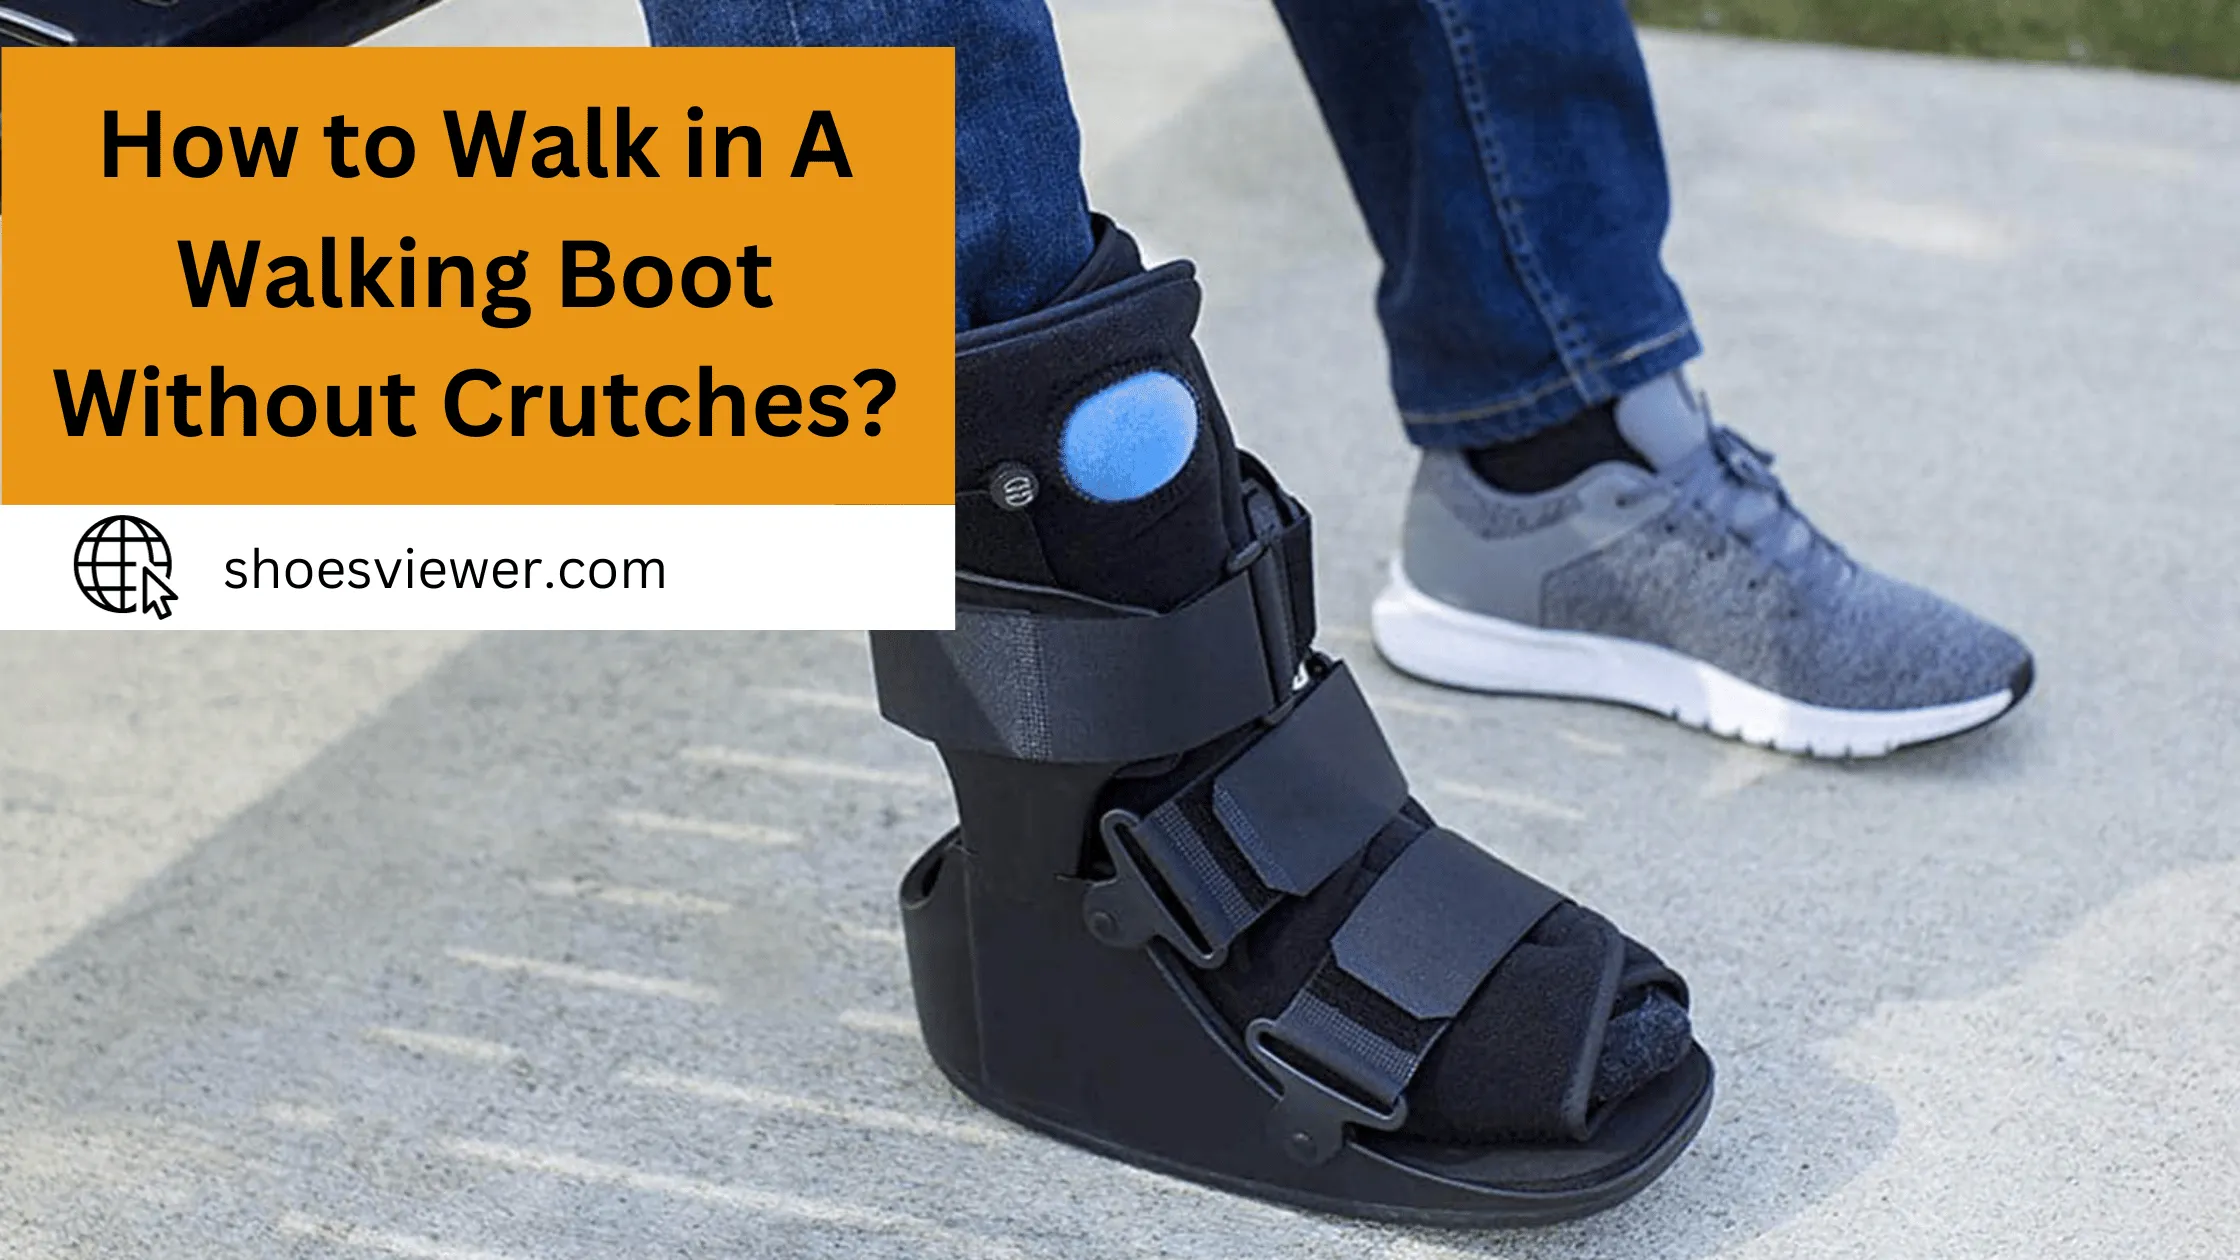 How To Walk In A Walking Boot Without Crutches